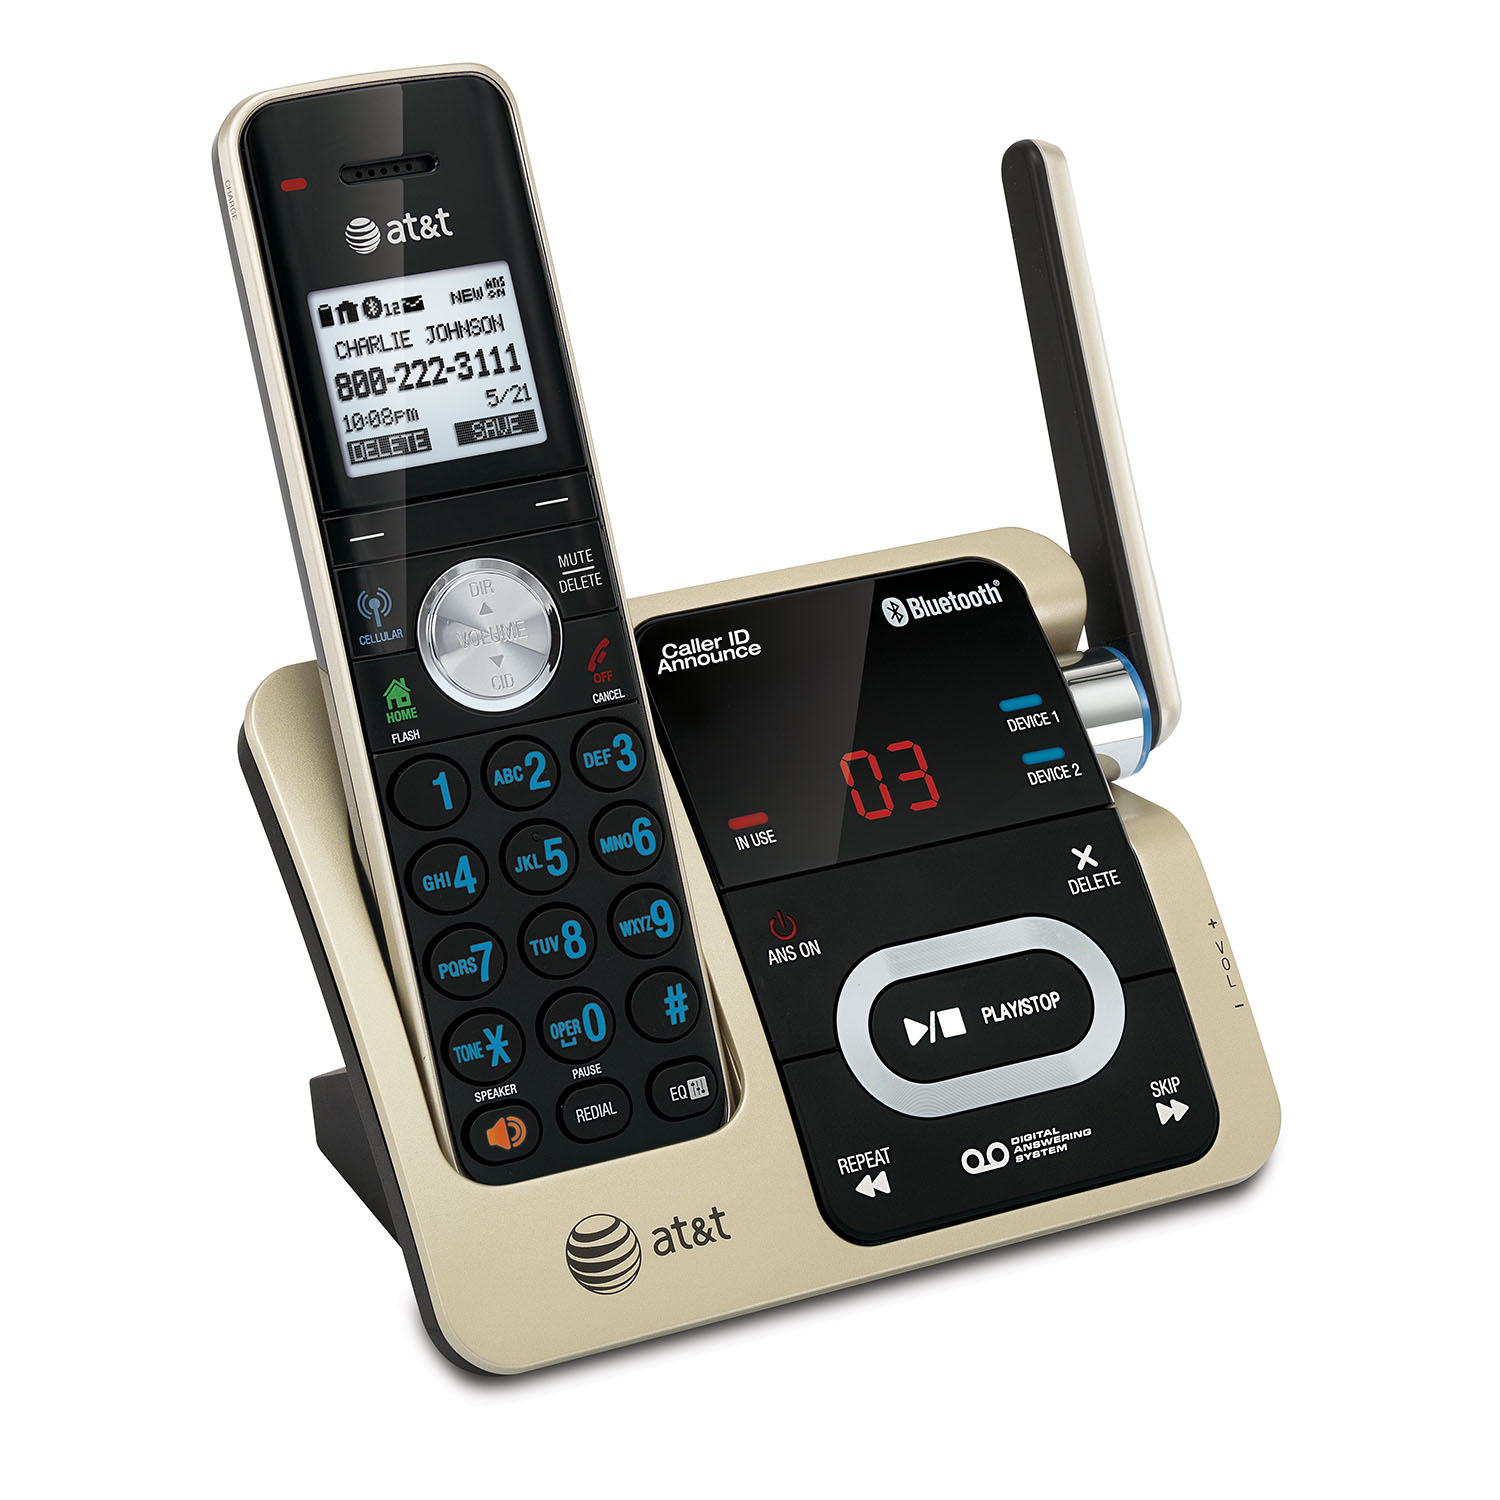 4 handset Connect to Cell™ answering system with caller ID/call waiting - view 2